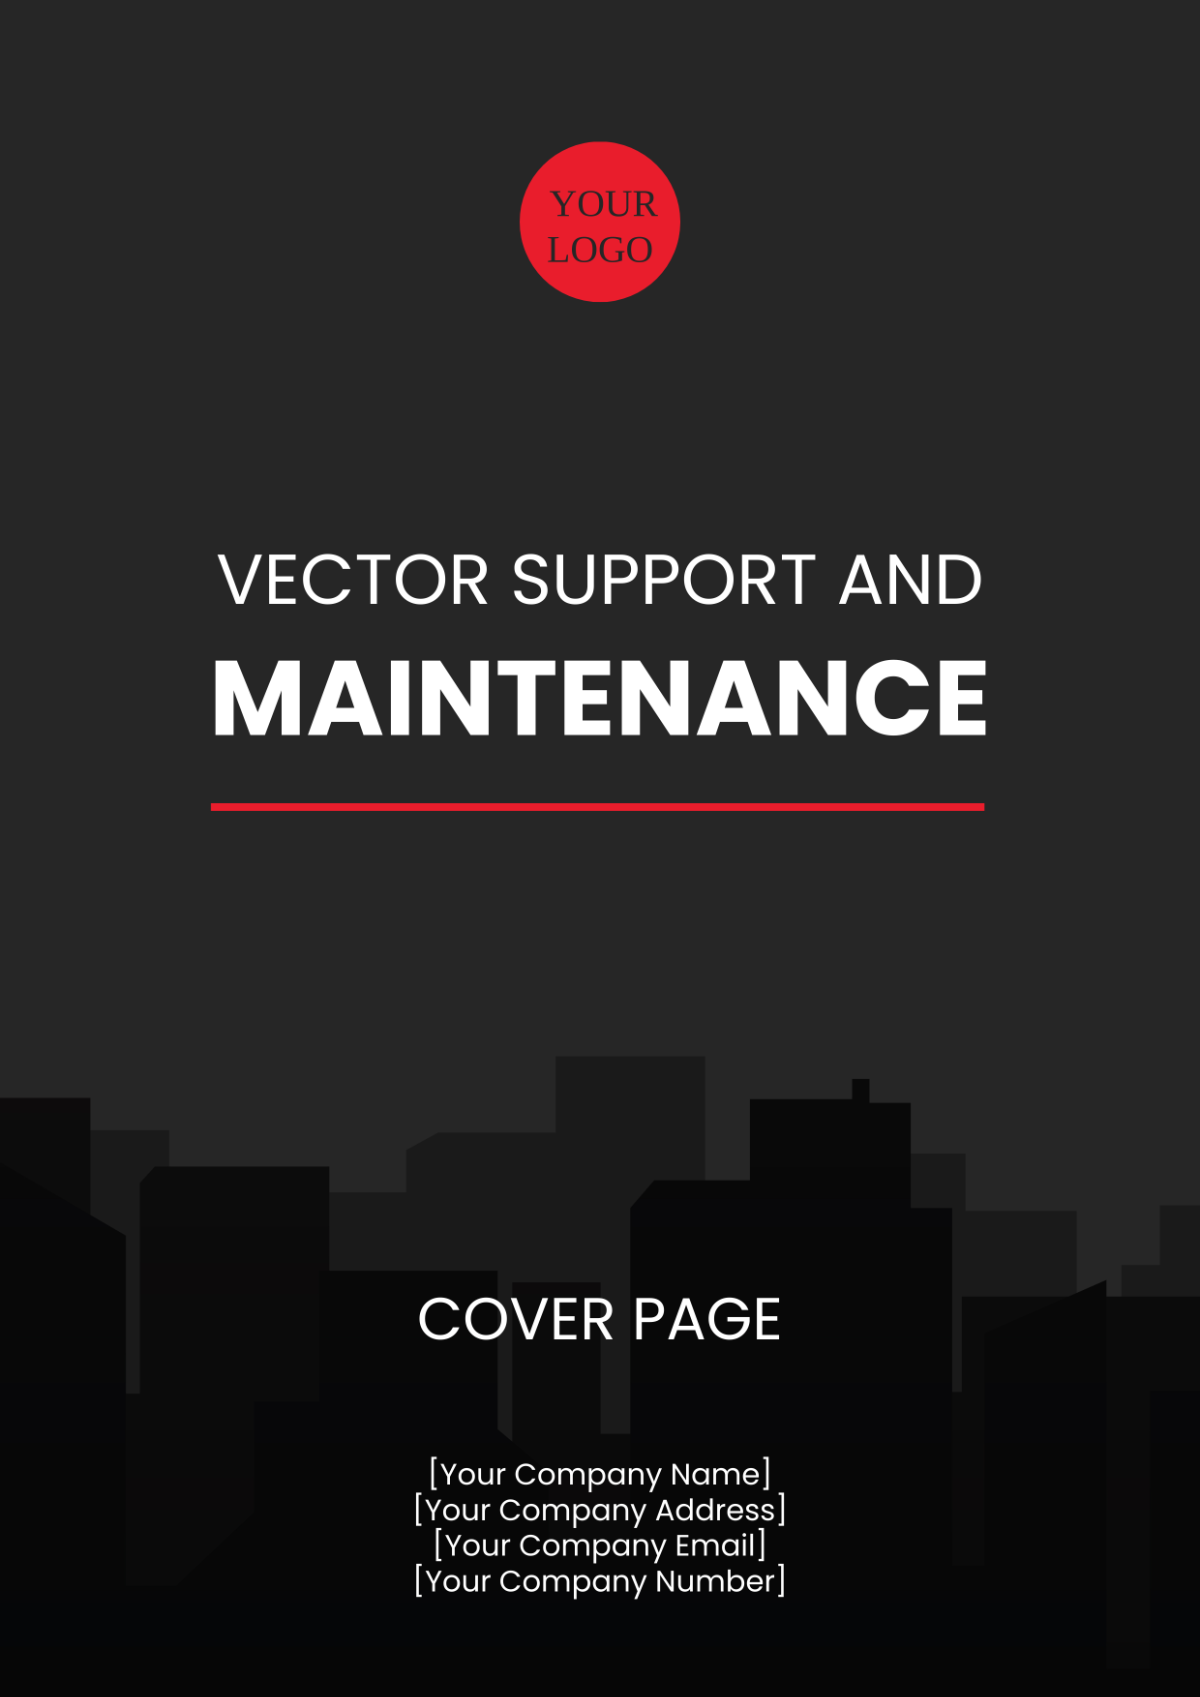 Vector Support and Maintenance Cover Page